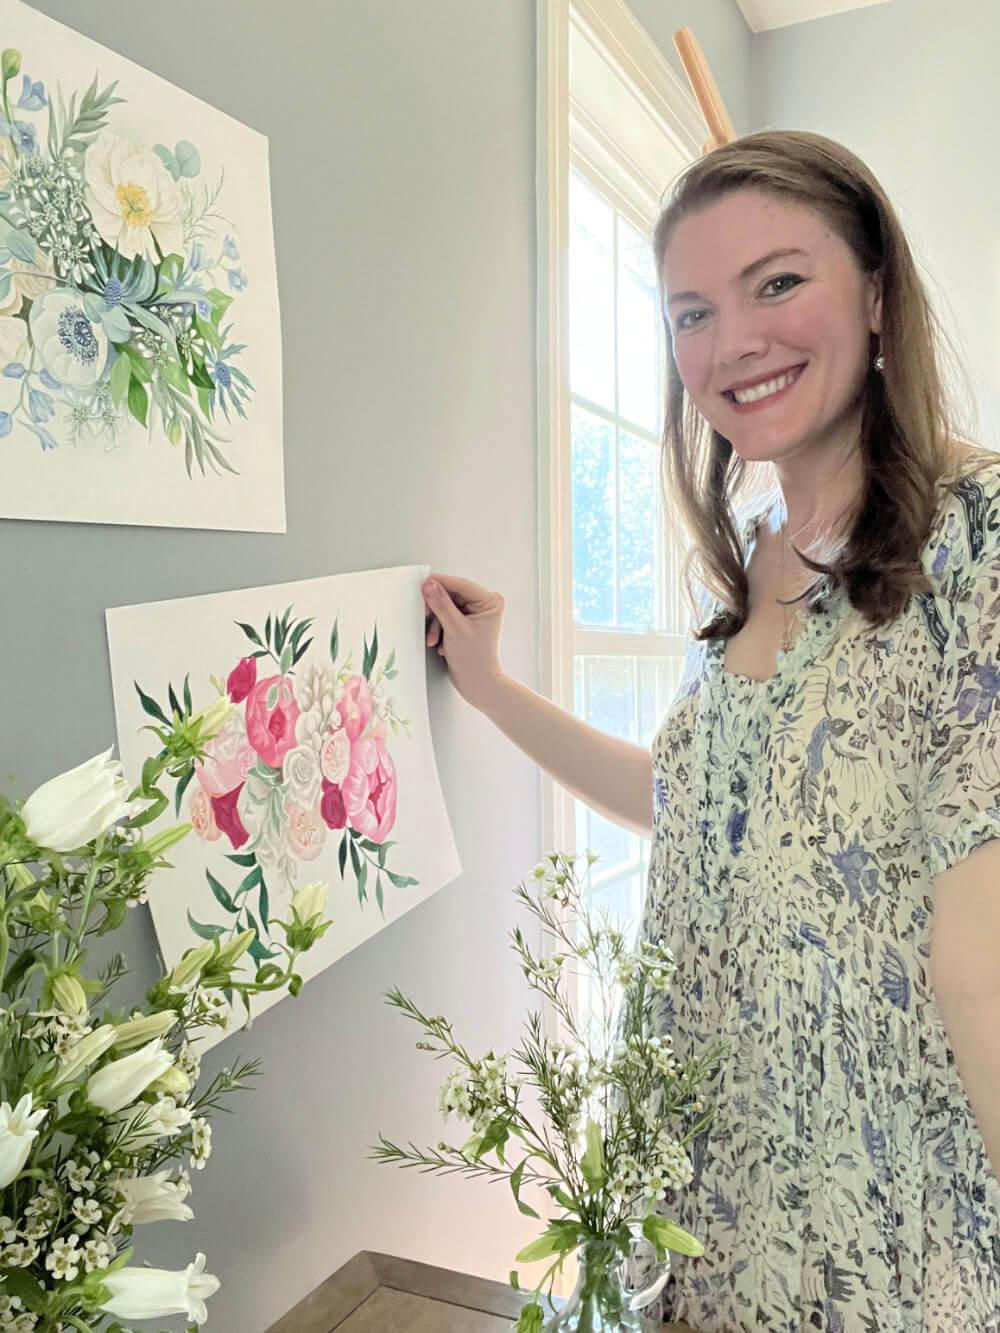 Courtney Hopkins smiling and standing in front of her pink and blue wedding bouquet paintings on the wall